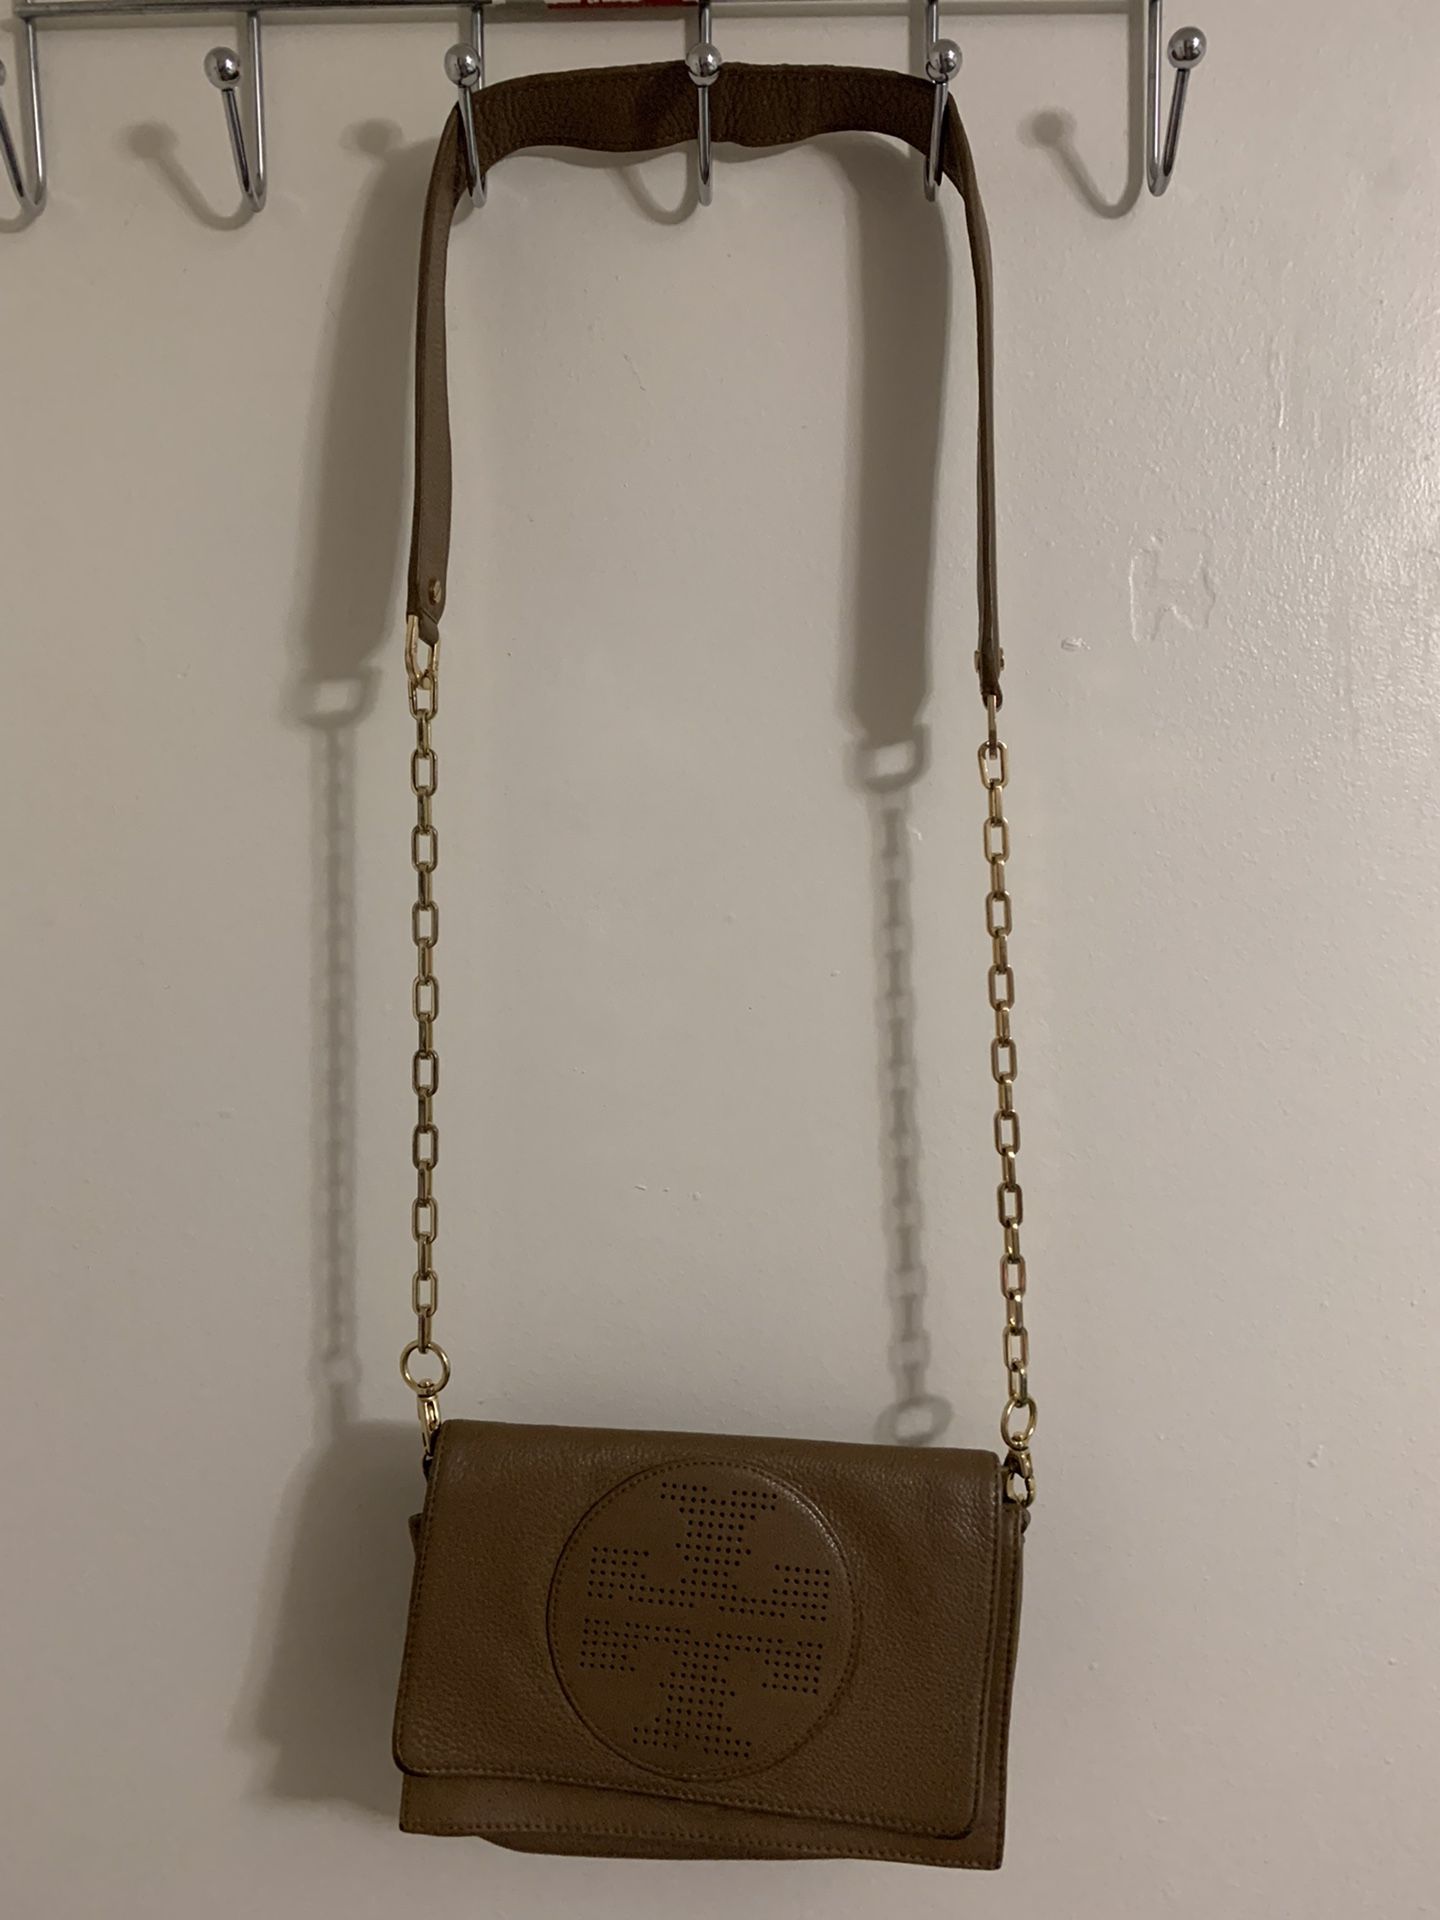 Tory Burch, Micheal Kors, And Tommy Hilfiger Purses